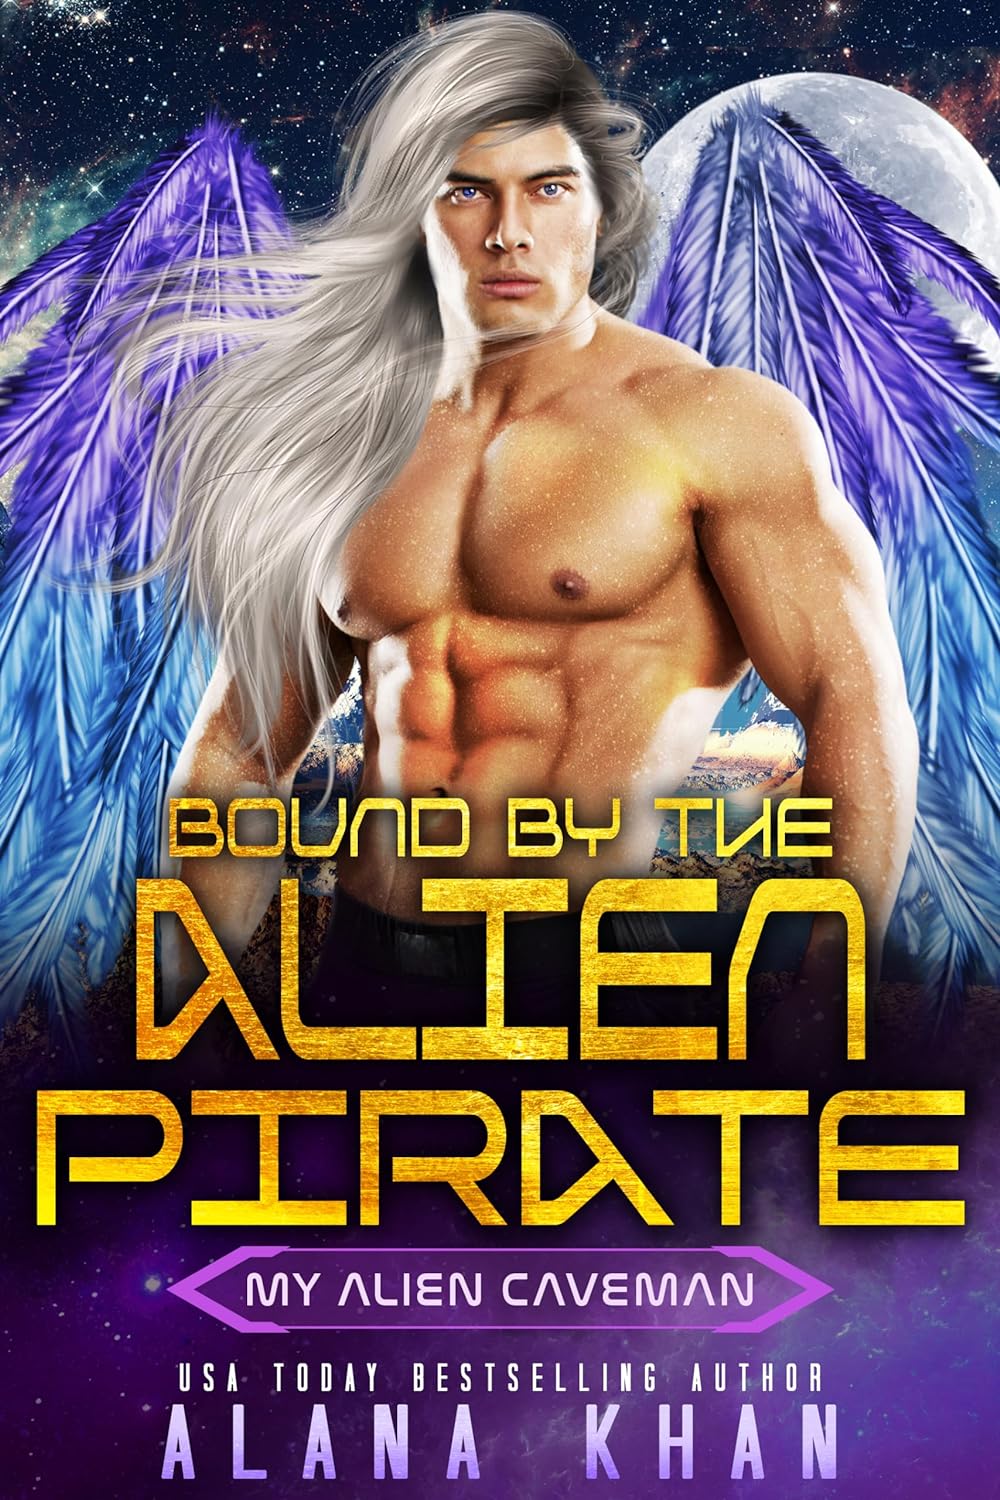 Bound by the Alien Pirate by Alana Khan